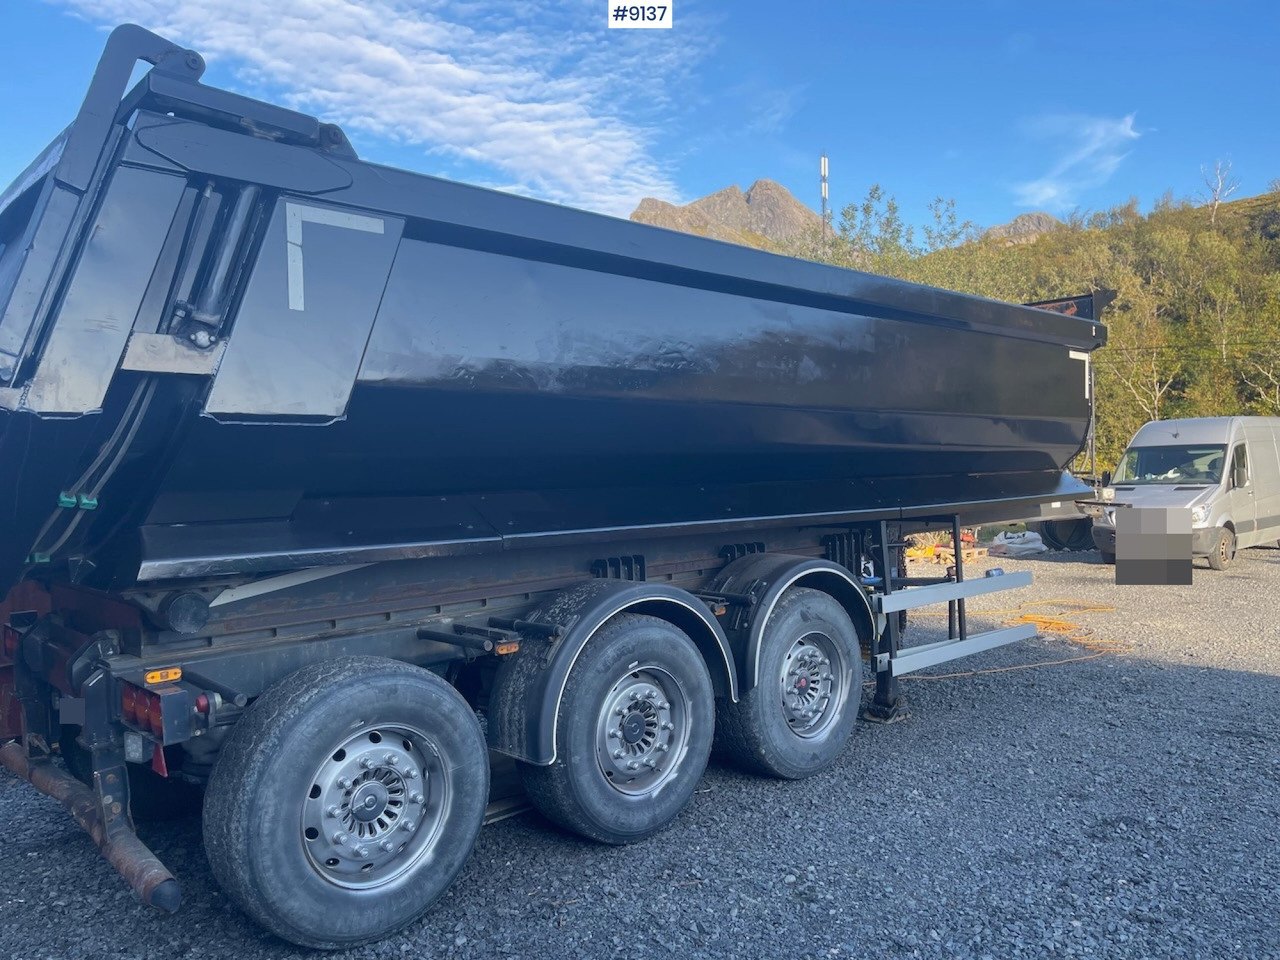 Carnehl tipping semi trailer in good condition – Finanzierungsleasing Carnehl tipping semi trailer in good condition: das Bild 2